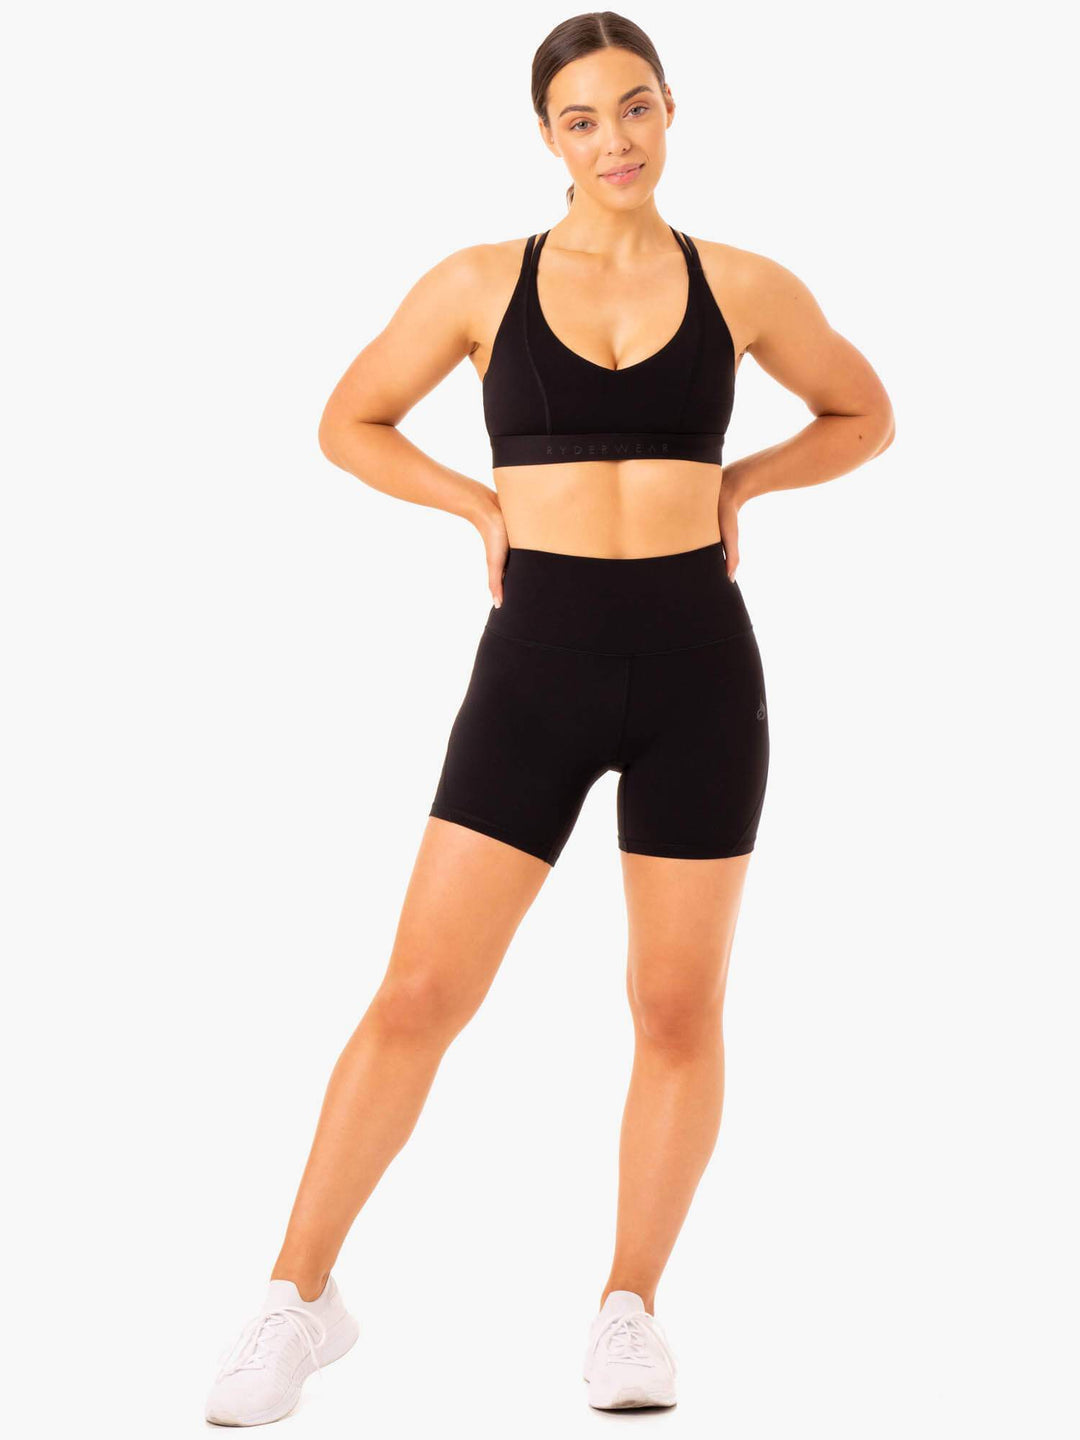 Double align shorts way more comfy than double aligned leggings